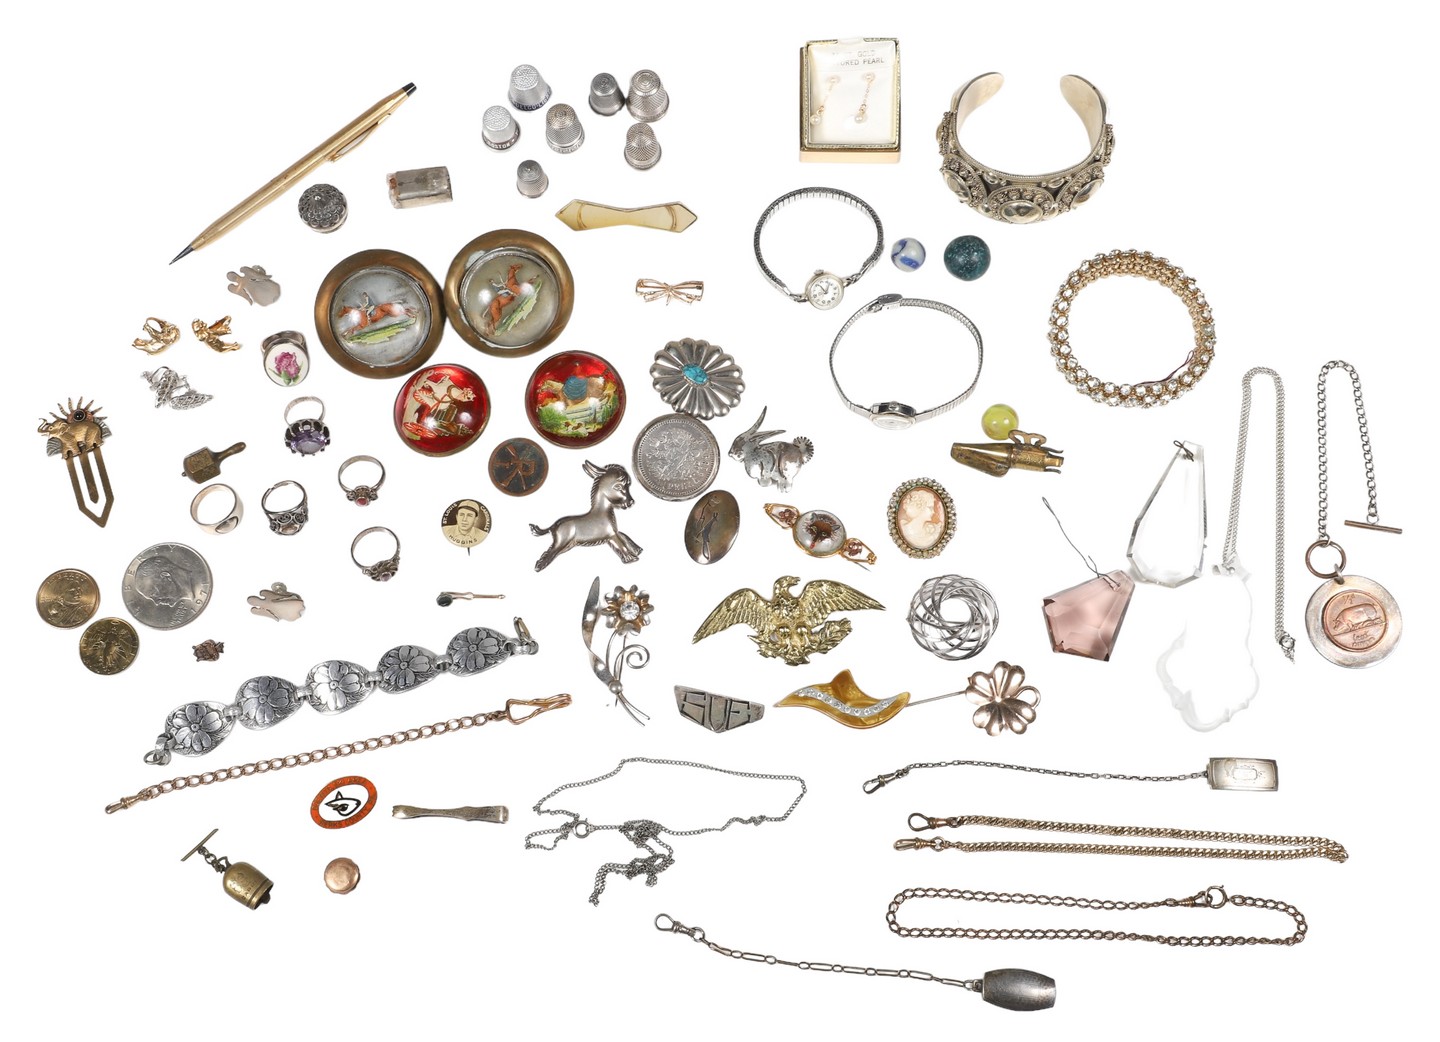 Eclectic jewelry and souvenir grouping